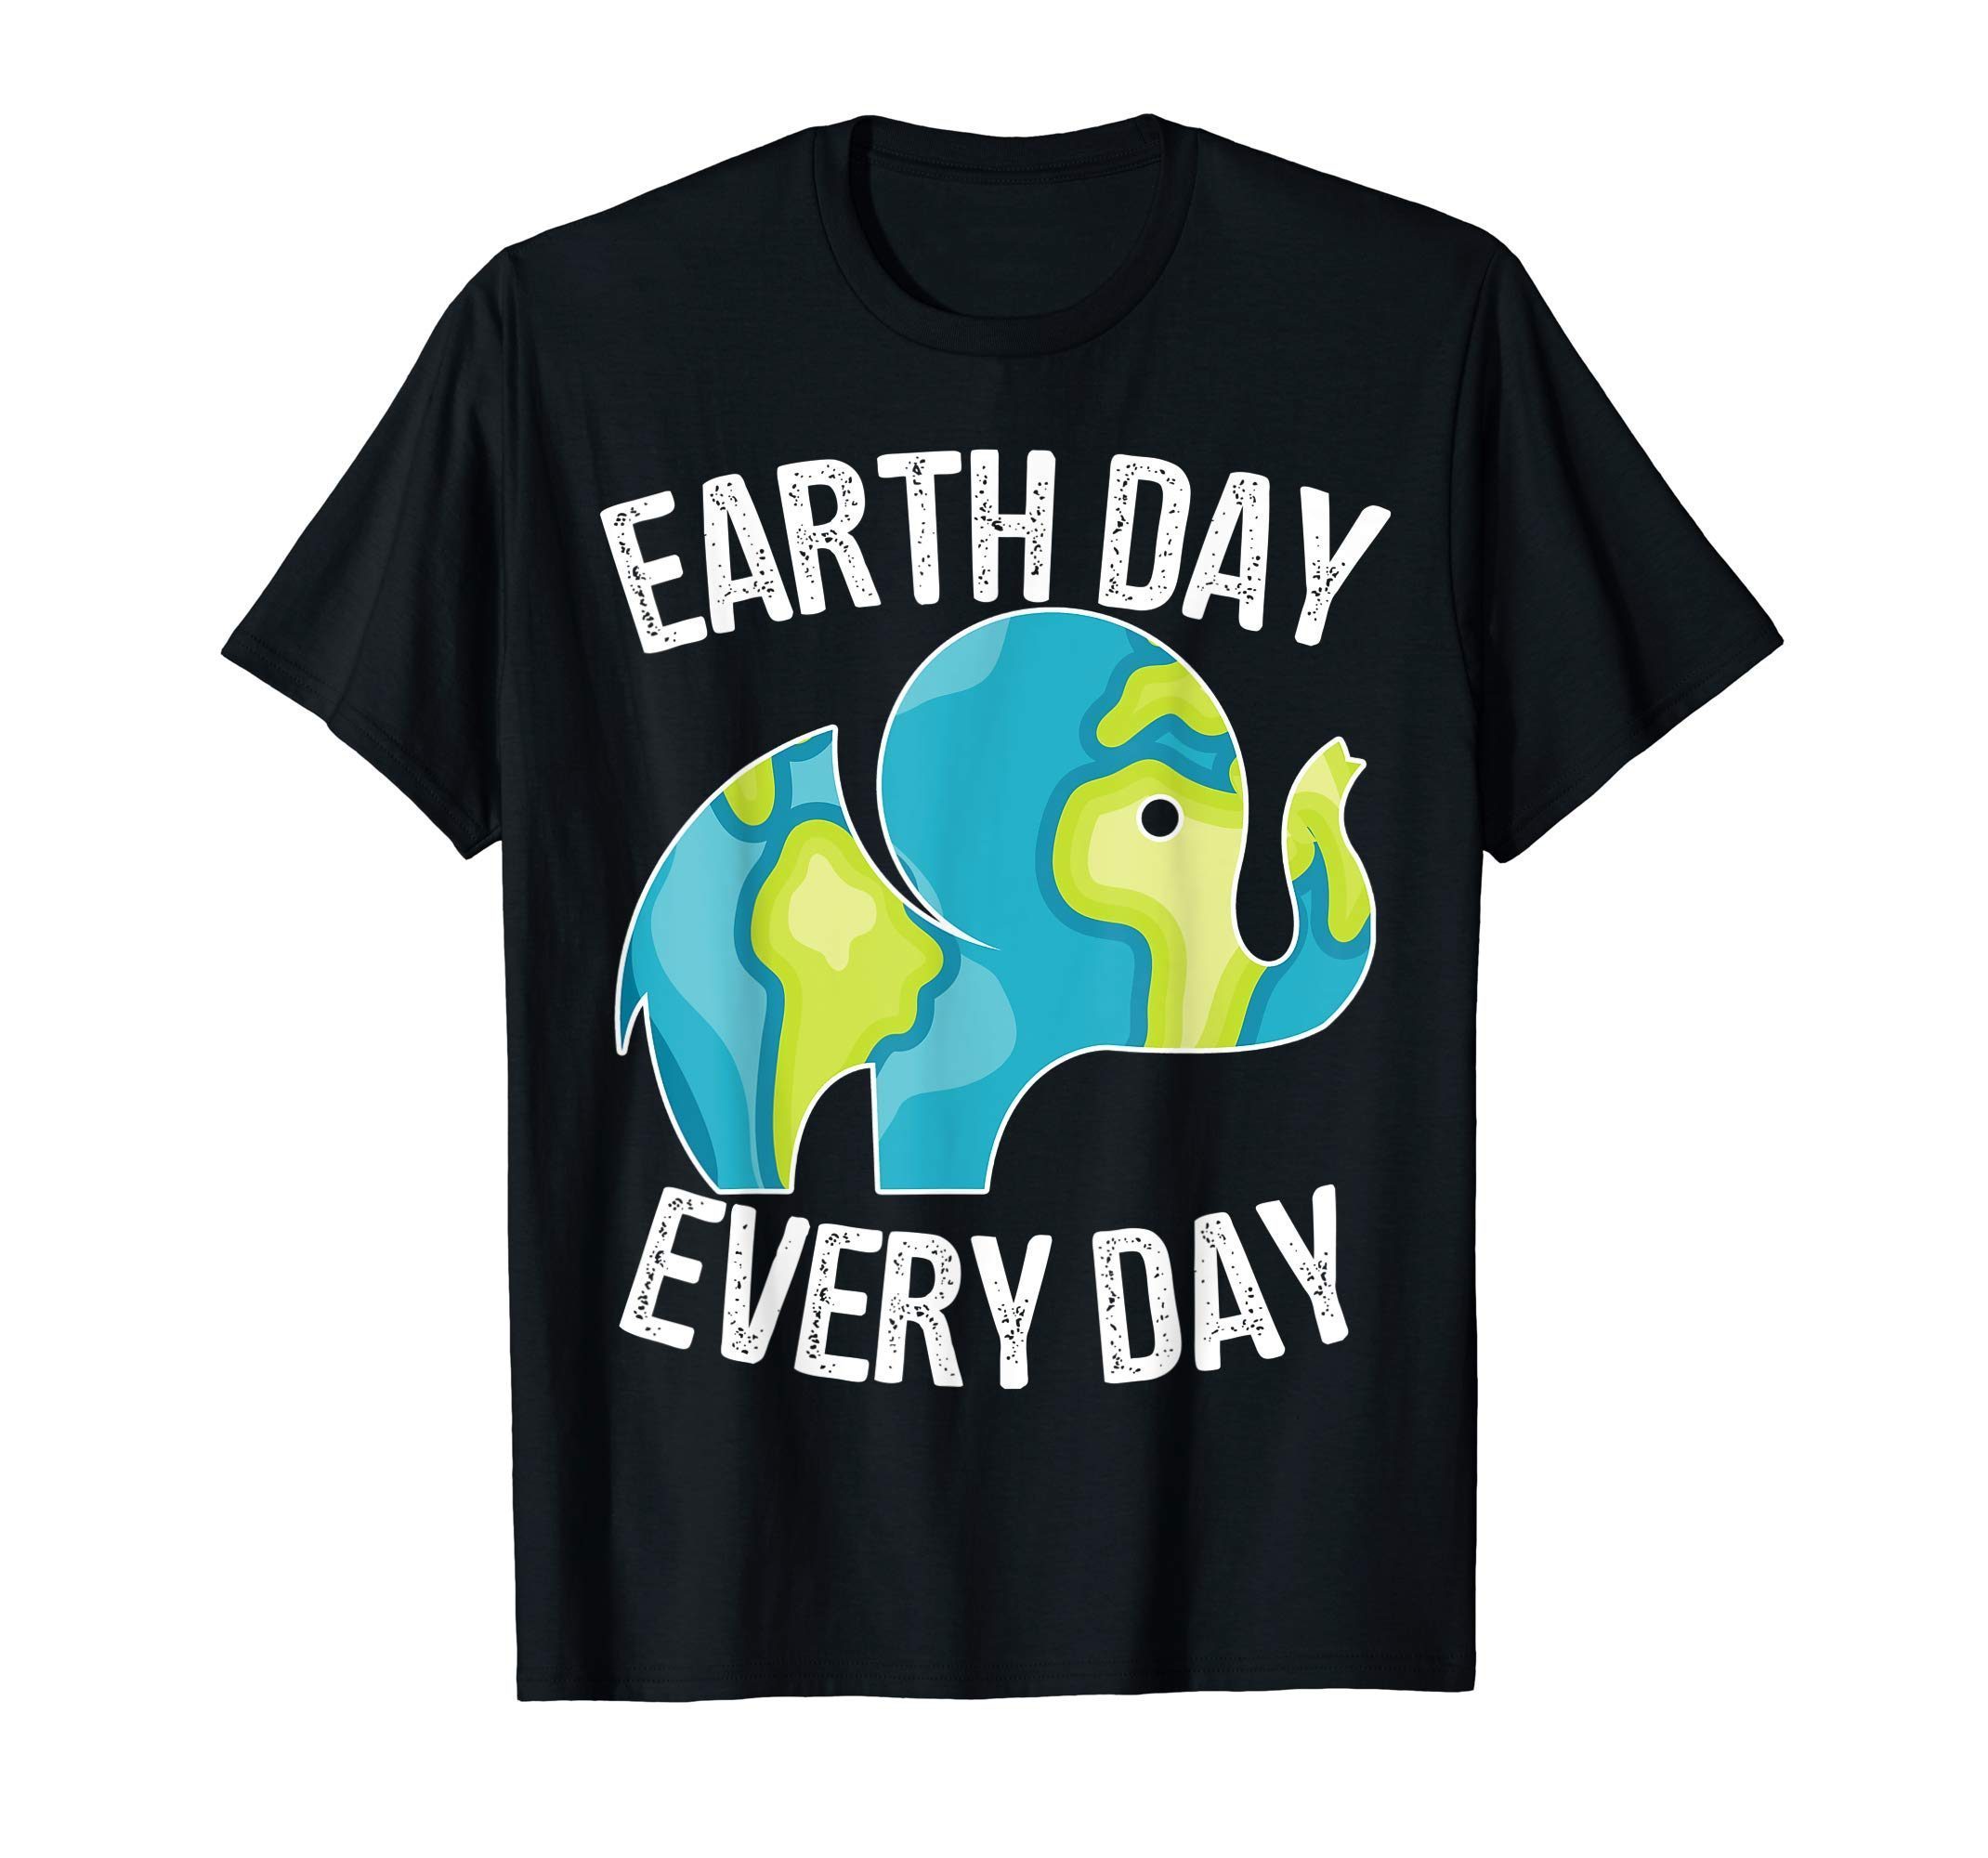 Earth Day Every Day Shirt Vintage Earth Day 2019 T-Shirt - Reviewshirts ...